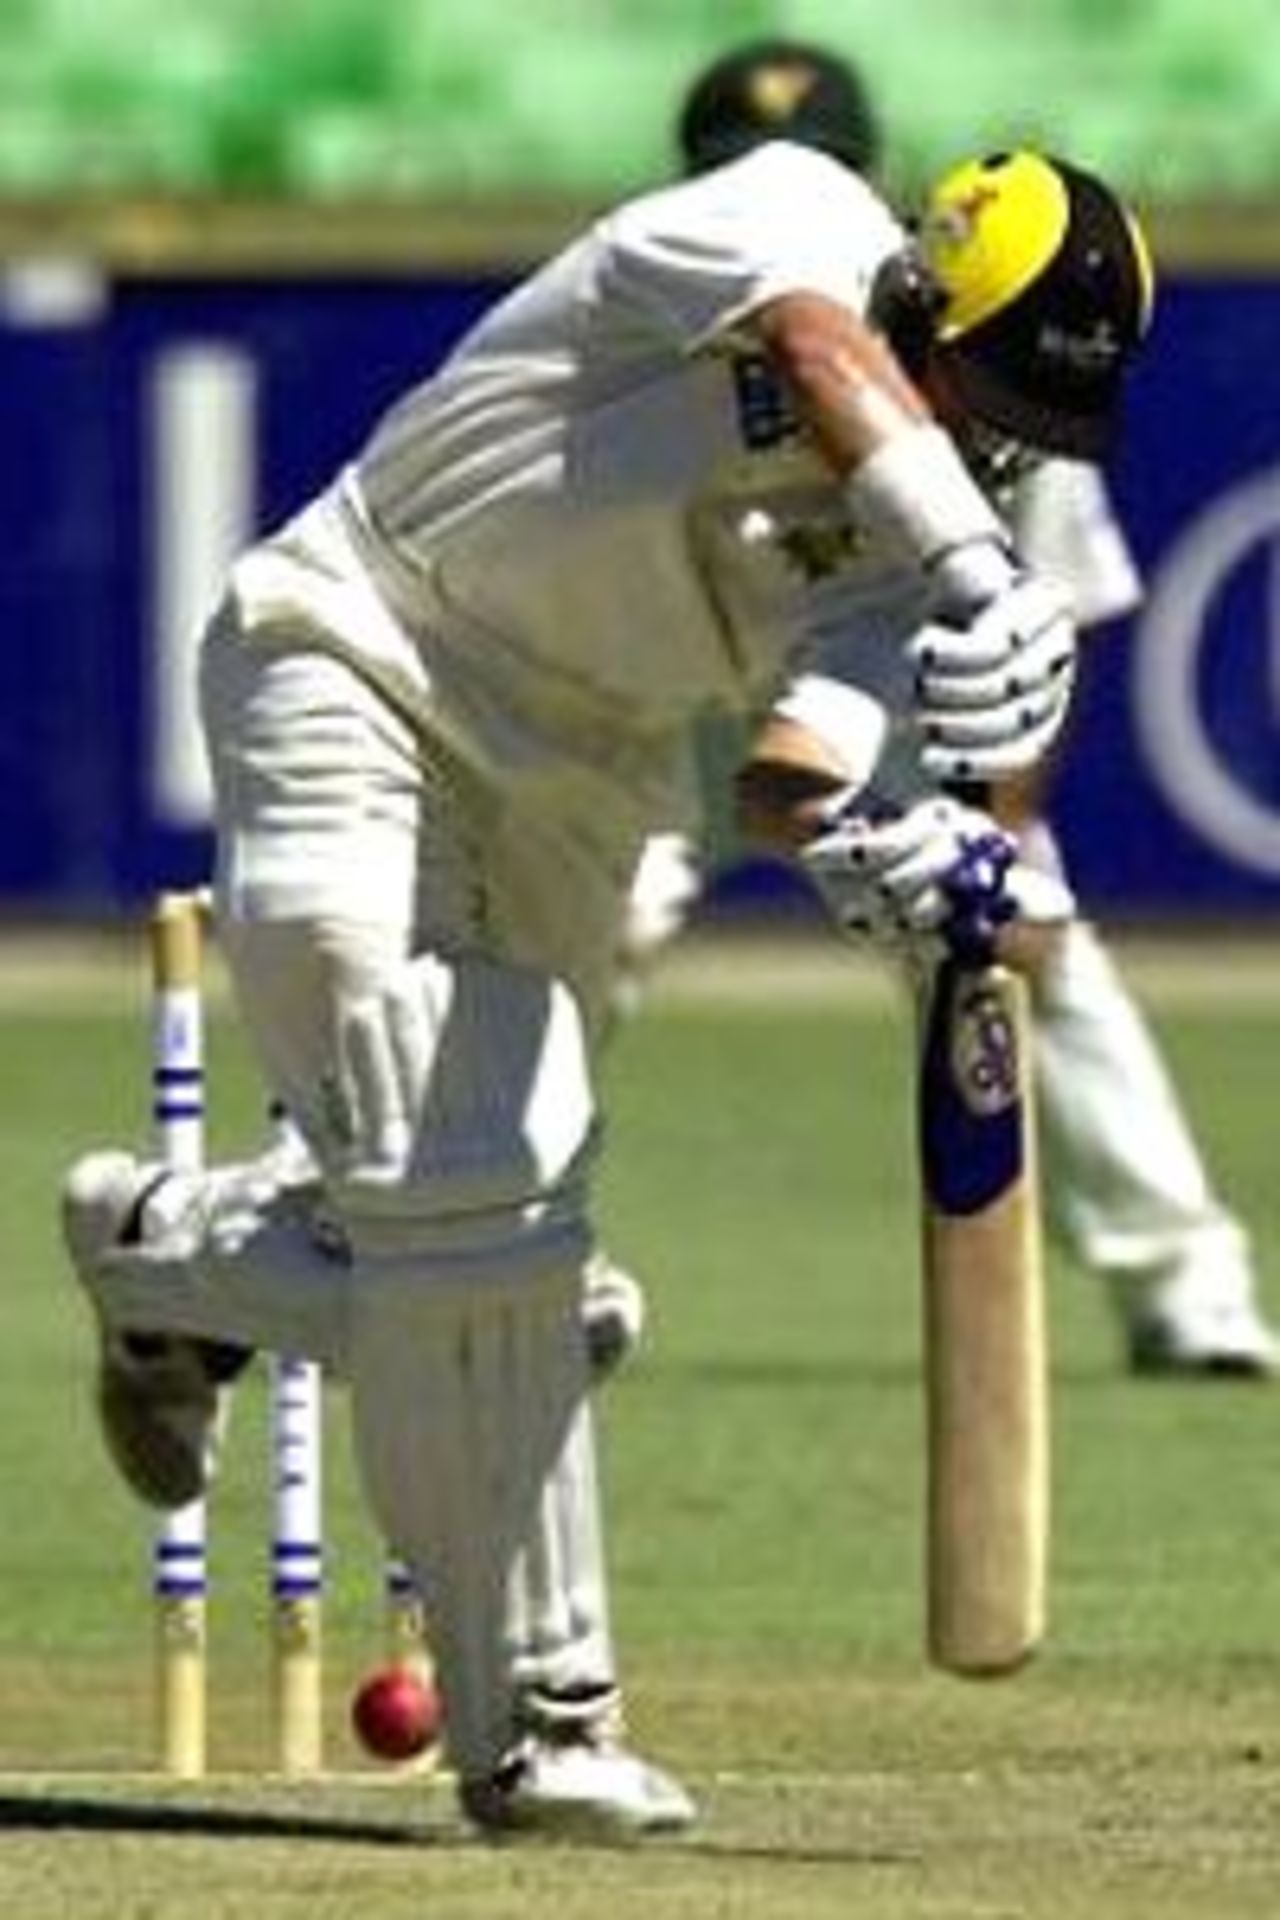 Michael Hussey of Western Australia in action during the Pura Cup match between the Tasmanian Tigers and the Western Wariors played at theWACA ground in Perth, Australia.